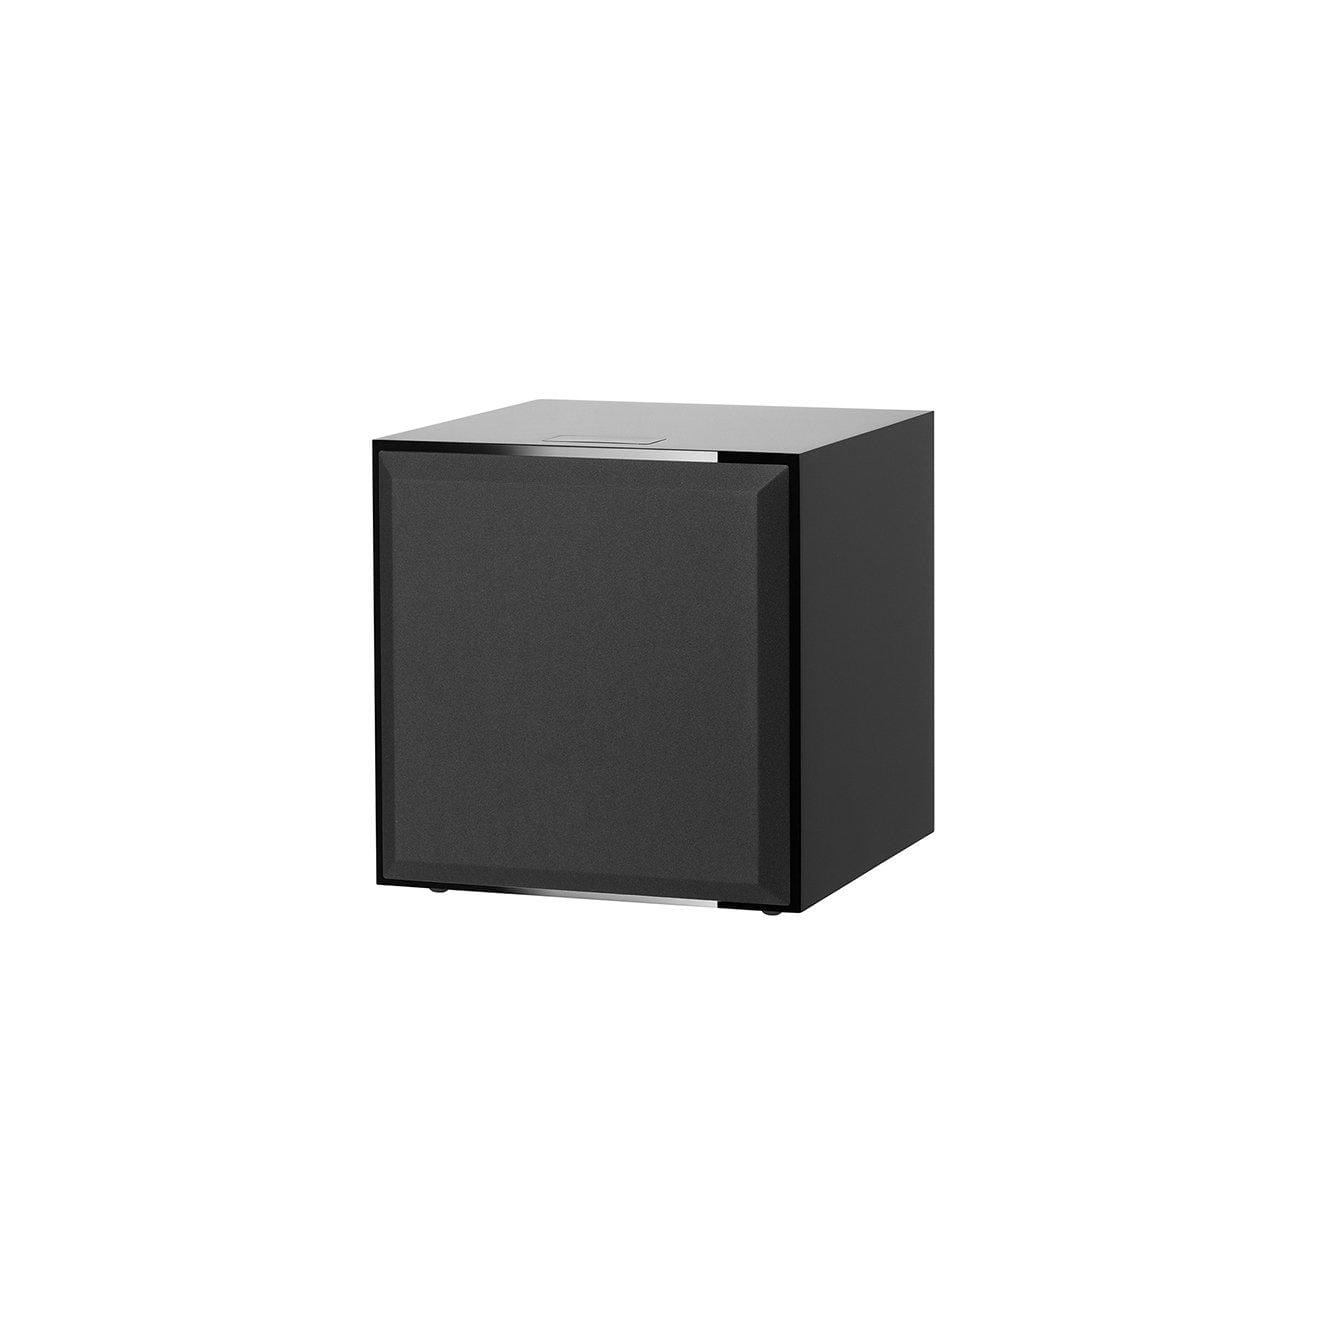 Bowers & Wilkins Subwoofers B&W DB4S 10-Inch 1000W Subwoofer - Gloss Black